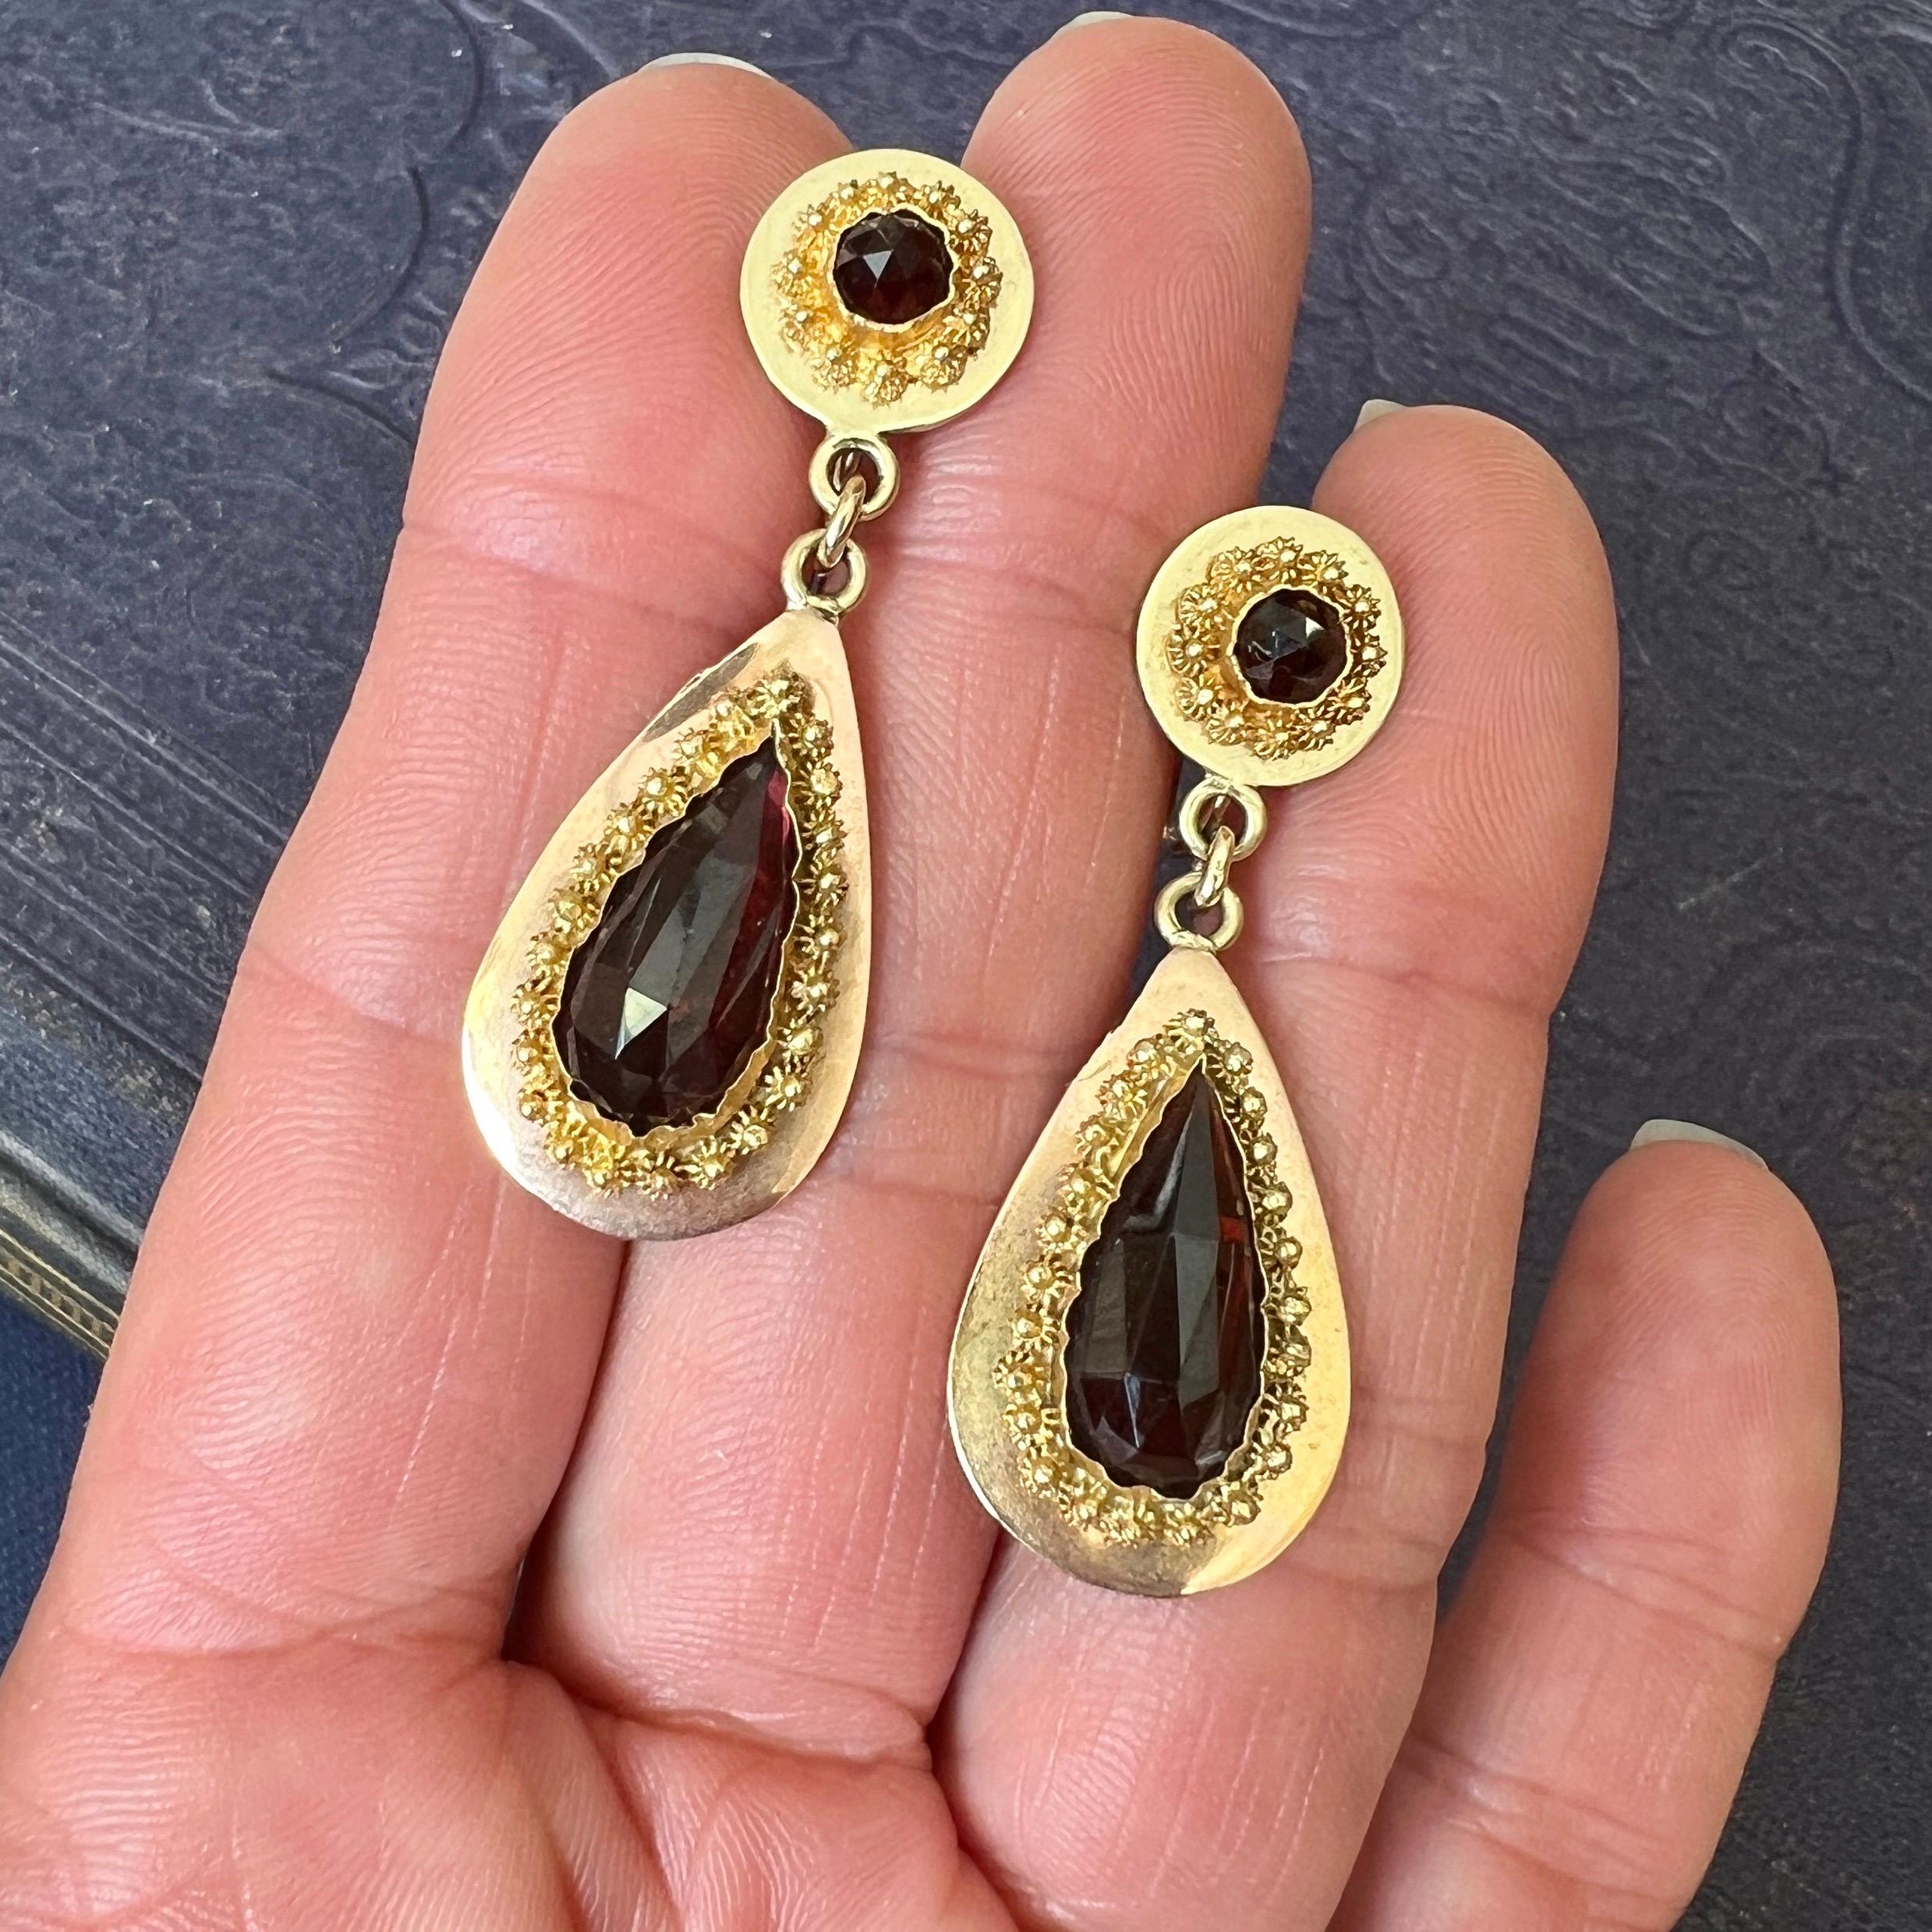 Garnets, the birthstone of January, are beautifully set in these 19th century dangle earrings. The earrings are made with fine cannetille and garnet stones set in a 10 karat gold mounting. The earrings have a rosette earpiece with a drop-shaped